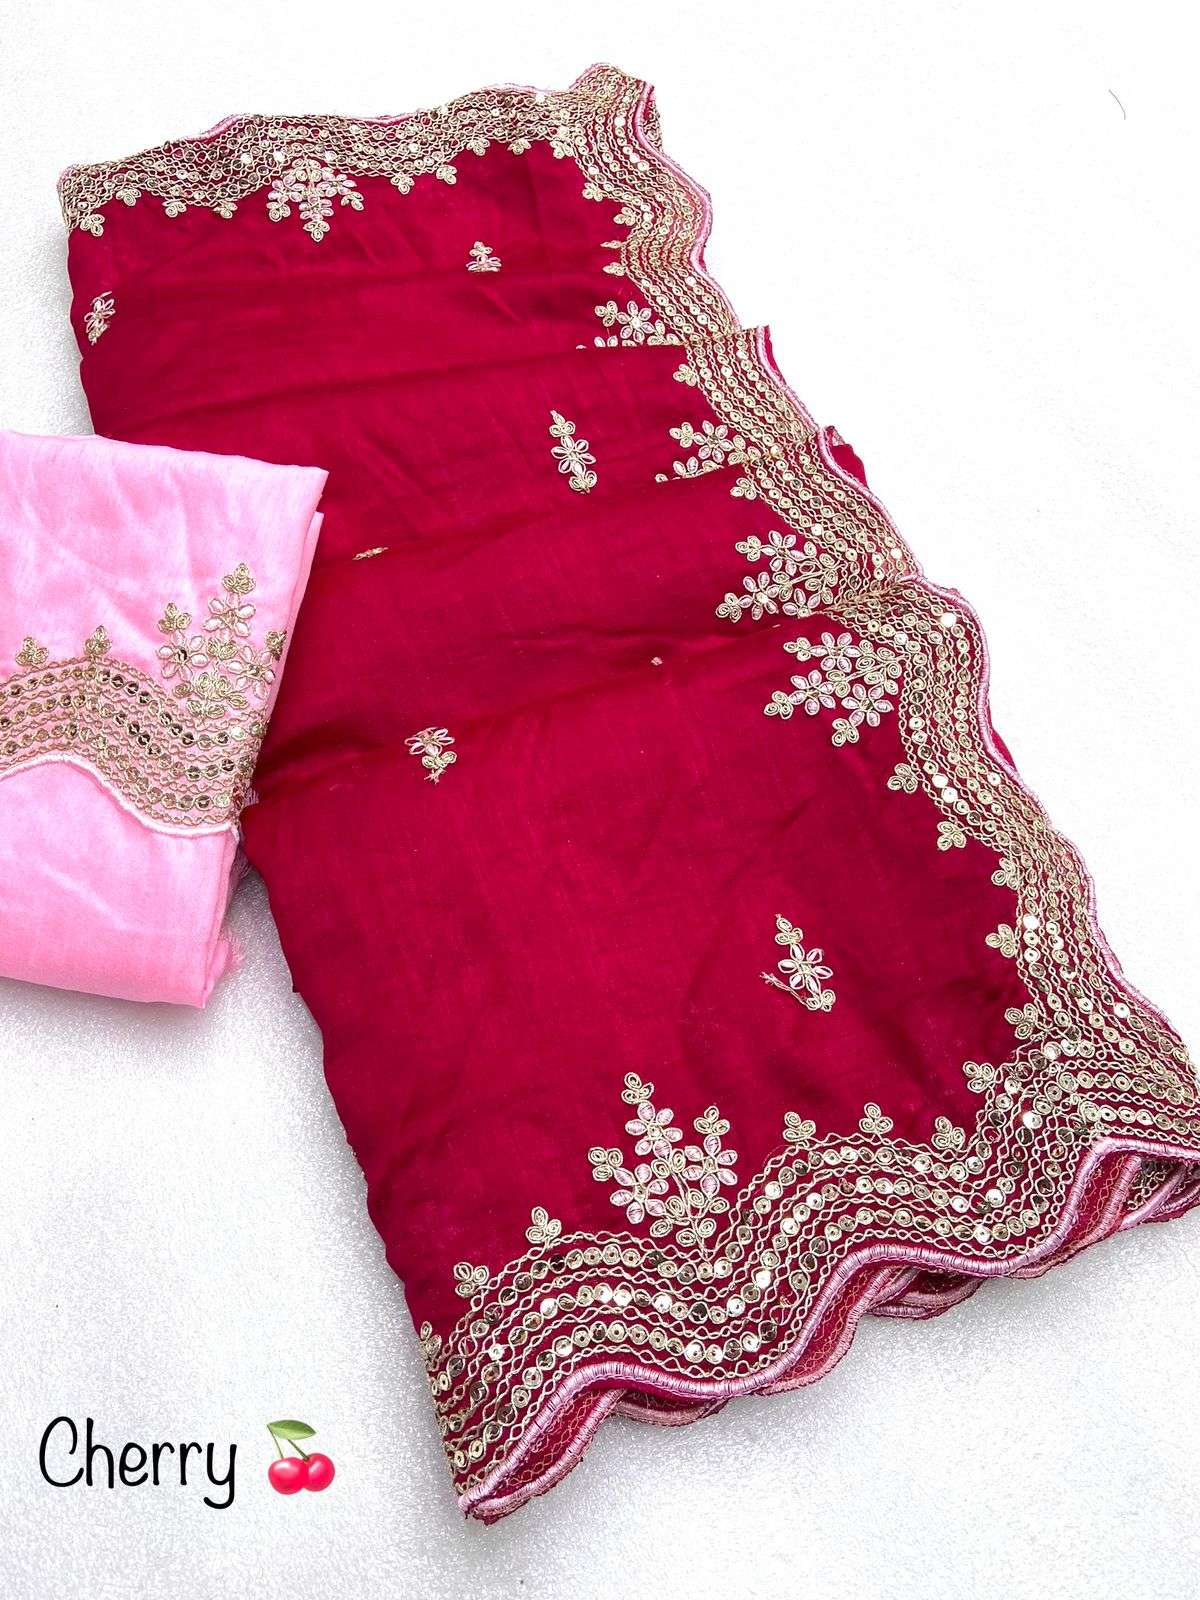 saree beautiful soft vhichitra saree with whole saree cut work border n 5 mm seqance coding work nd multi coding butta in whole saree with rich look piping